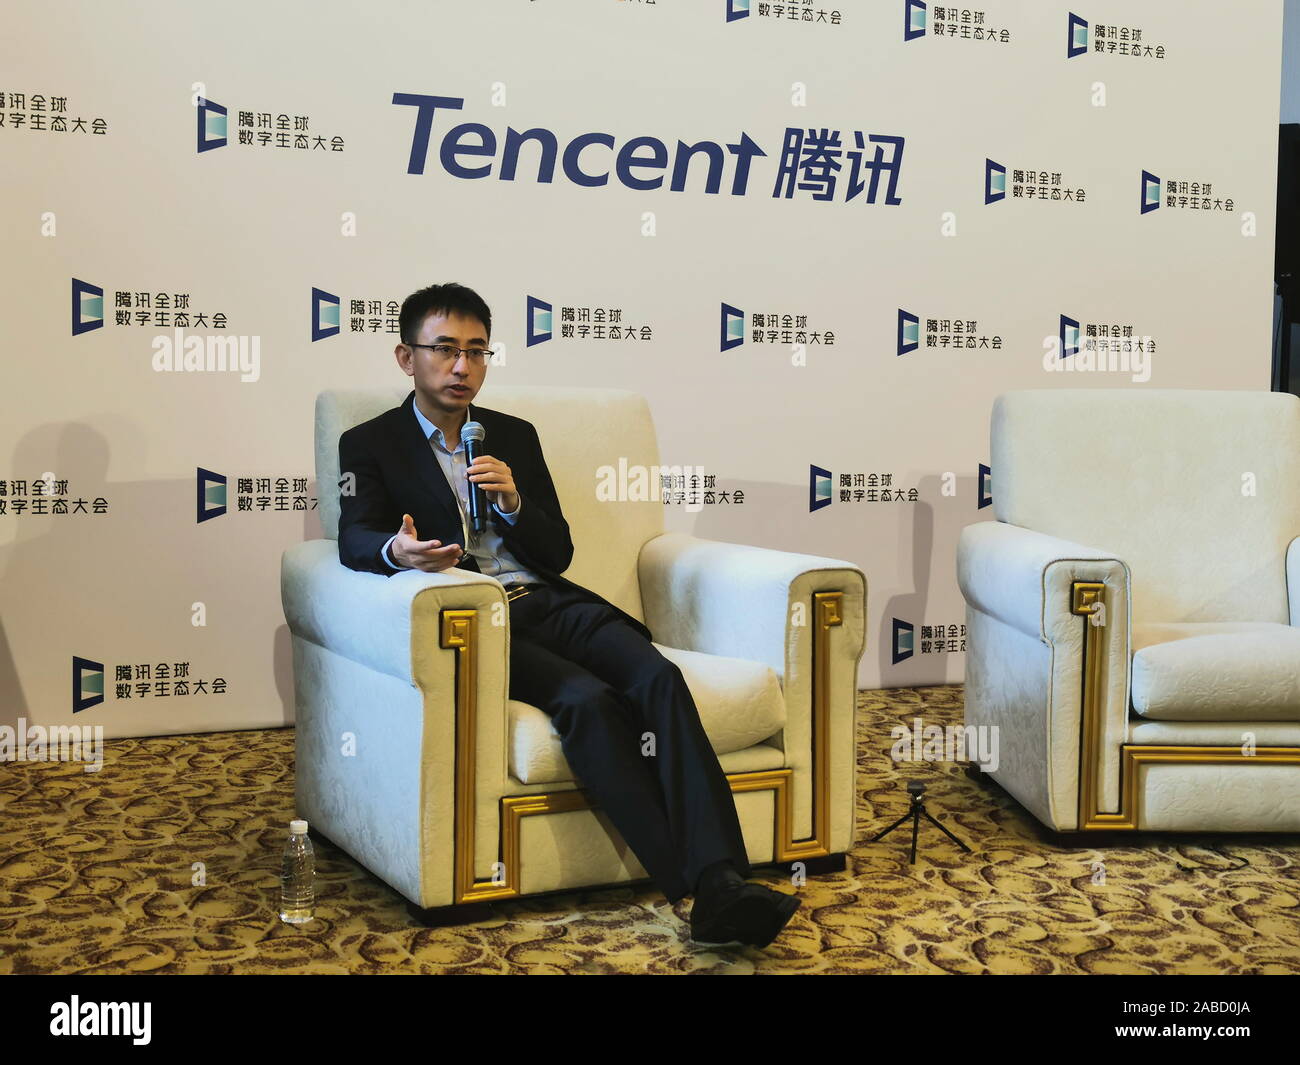 Vice-president of Tencent Cloud, a cloud compute service provided by Tencent, attends at Tencent Global Digital Ecosystem Summit held to show demonstr Stock Photo